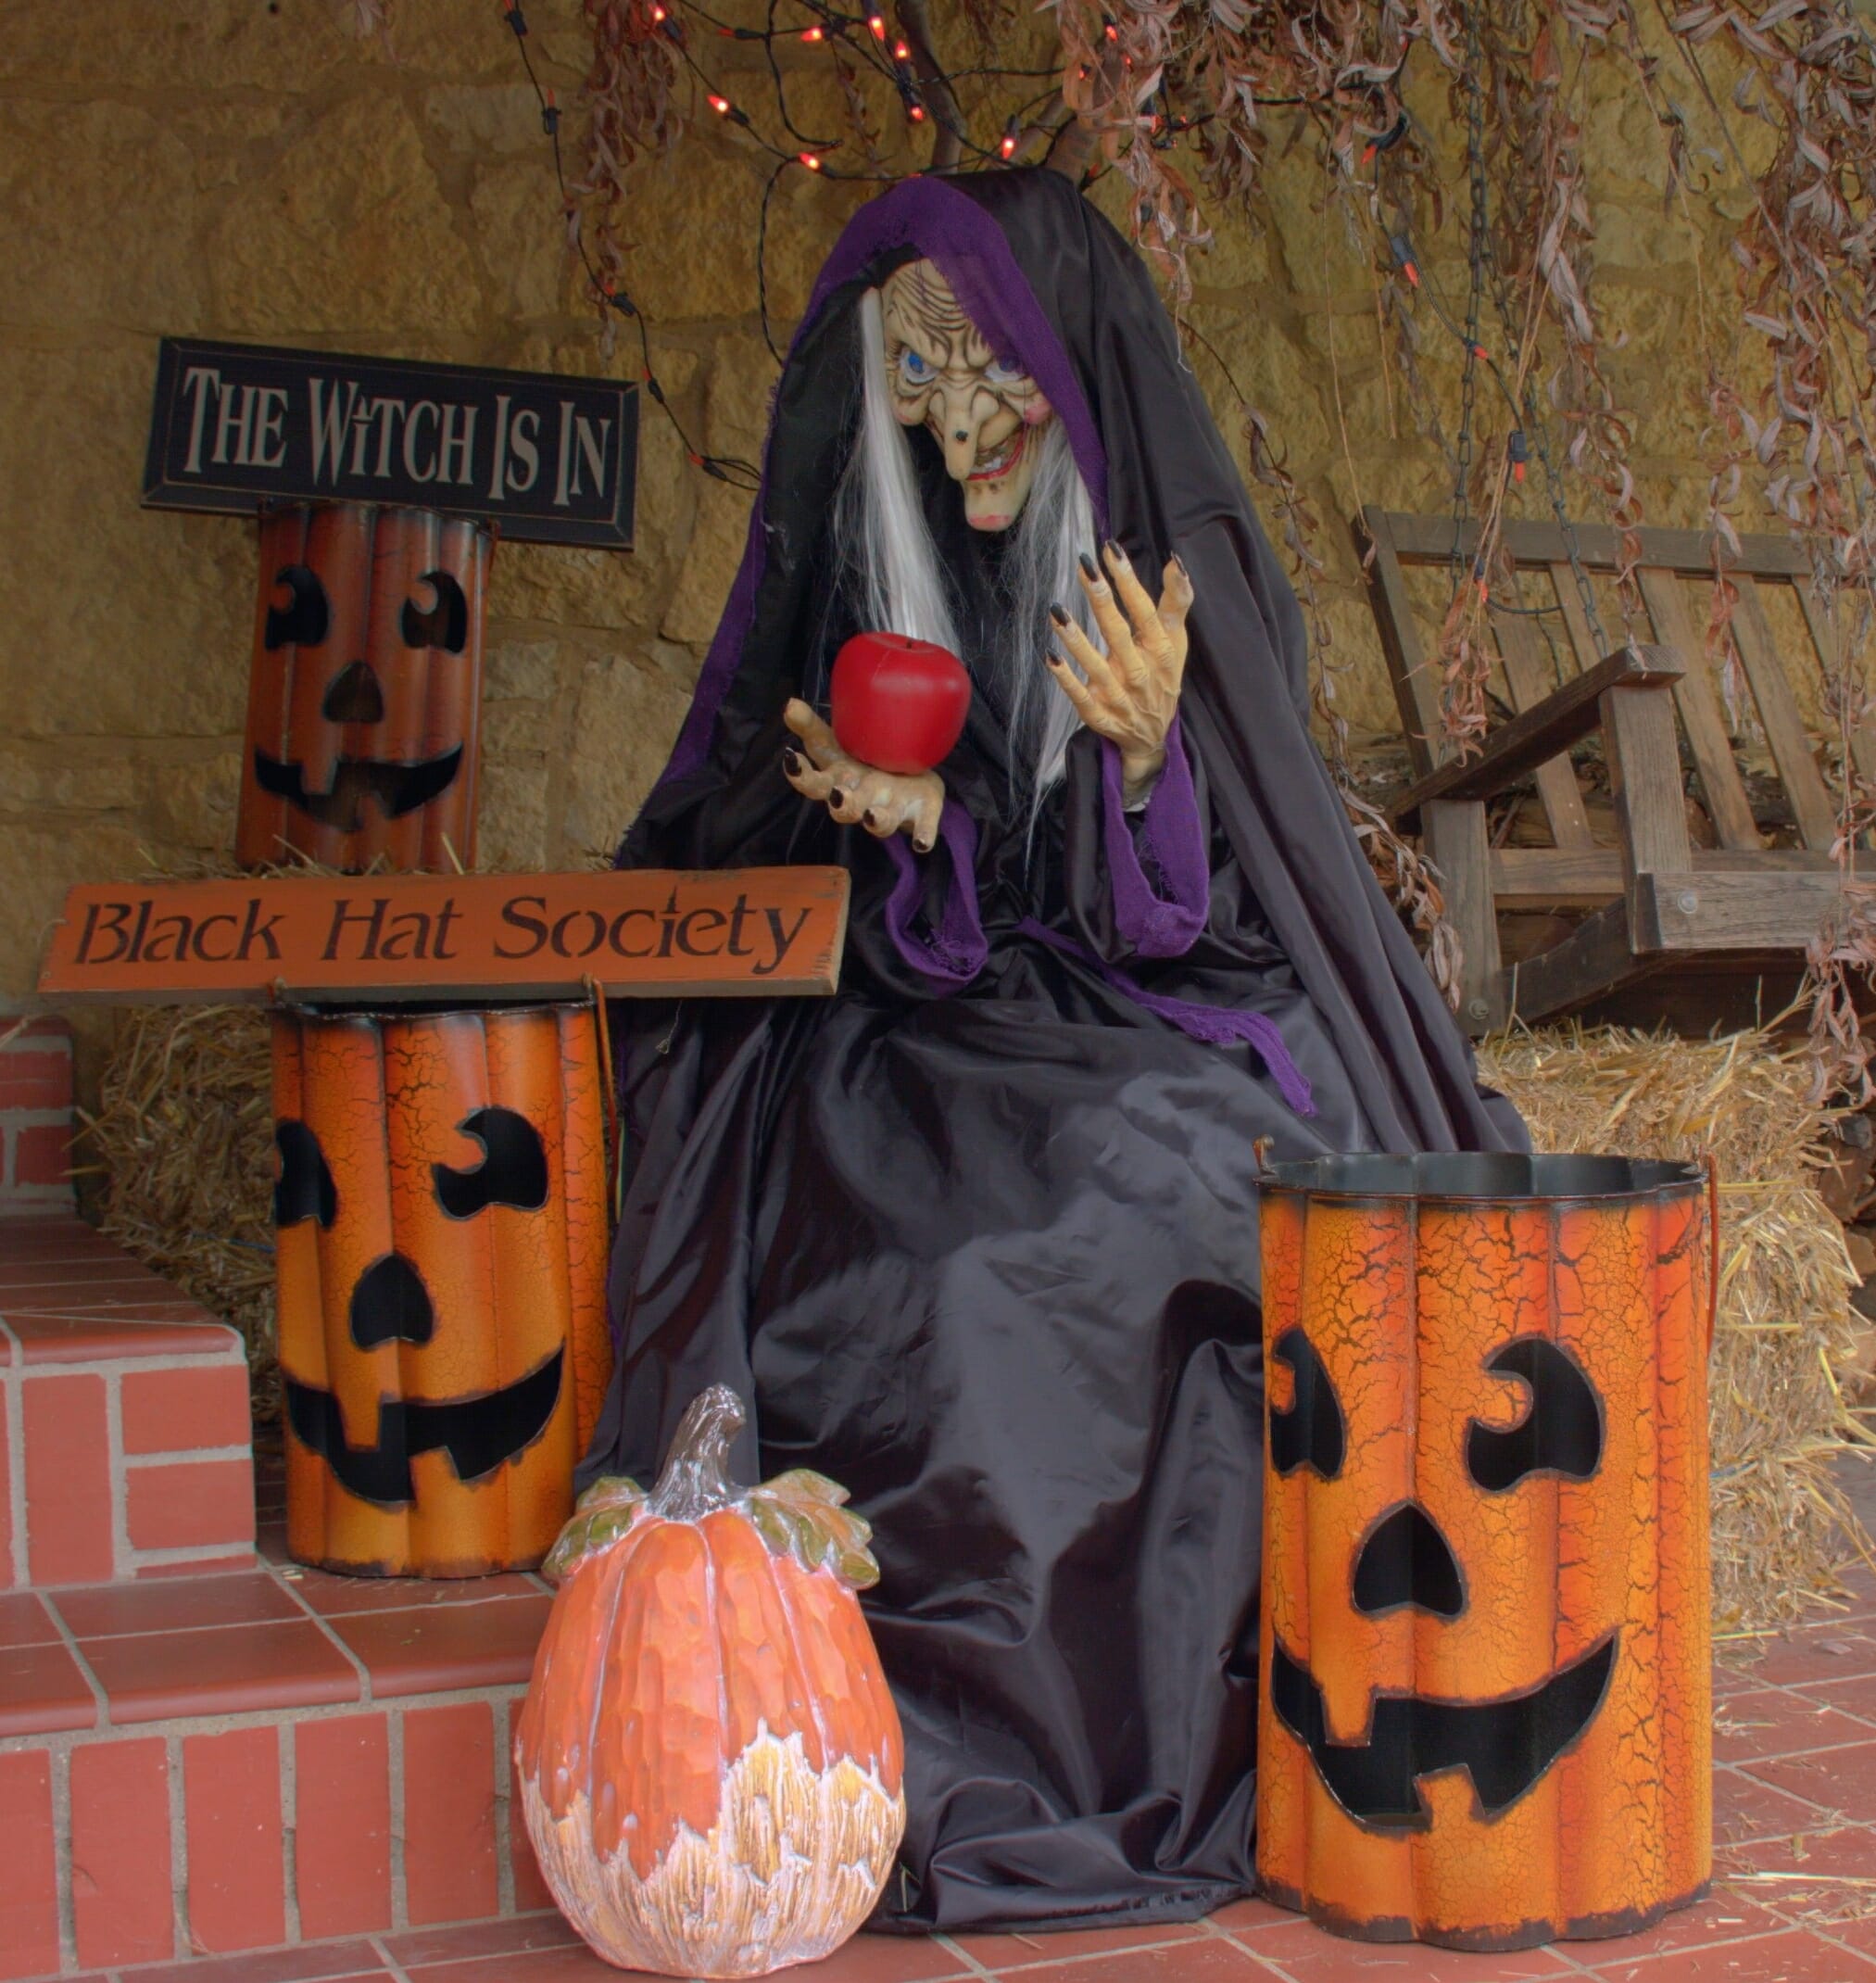 A witch sitting on straw bales with apple in hand, next to three metal Jack-o-Lantern luminaries and Halloween signs.